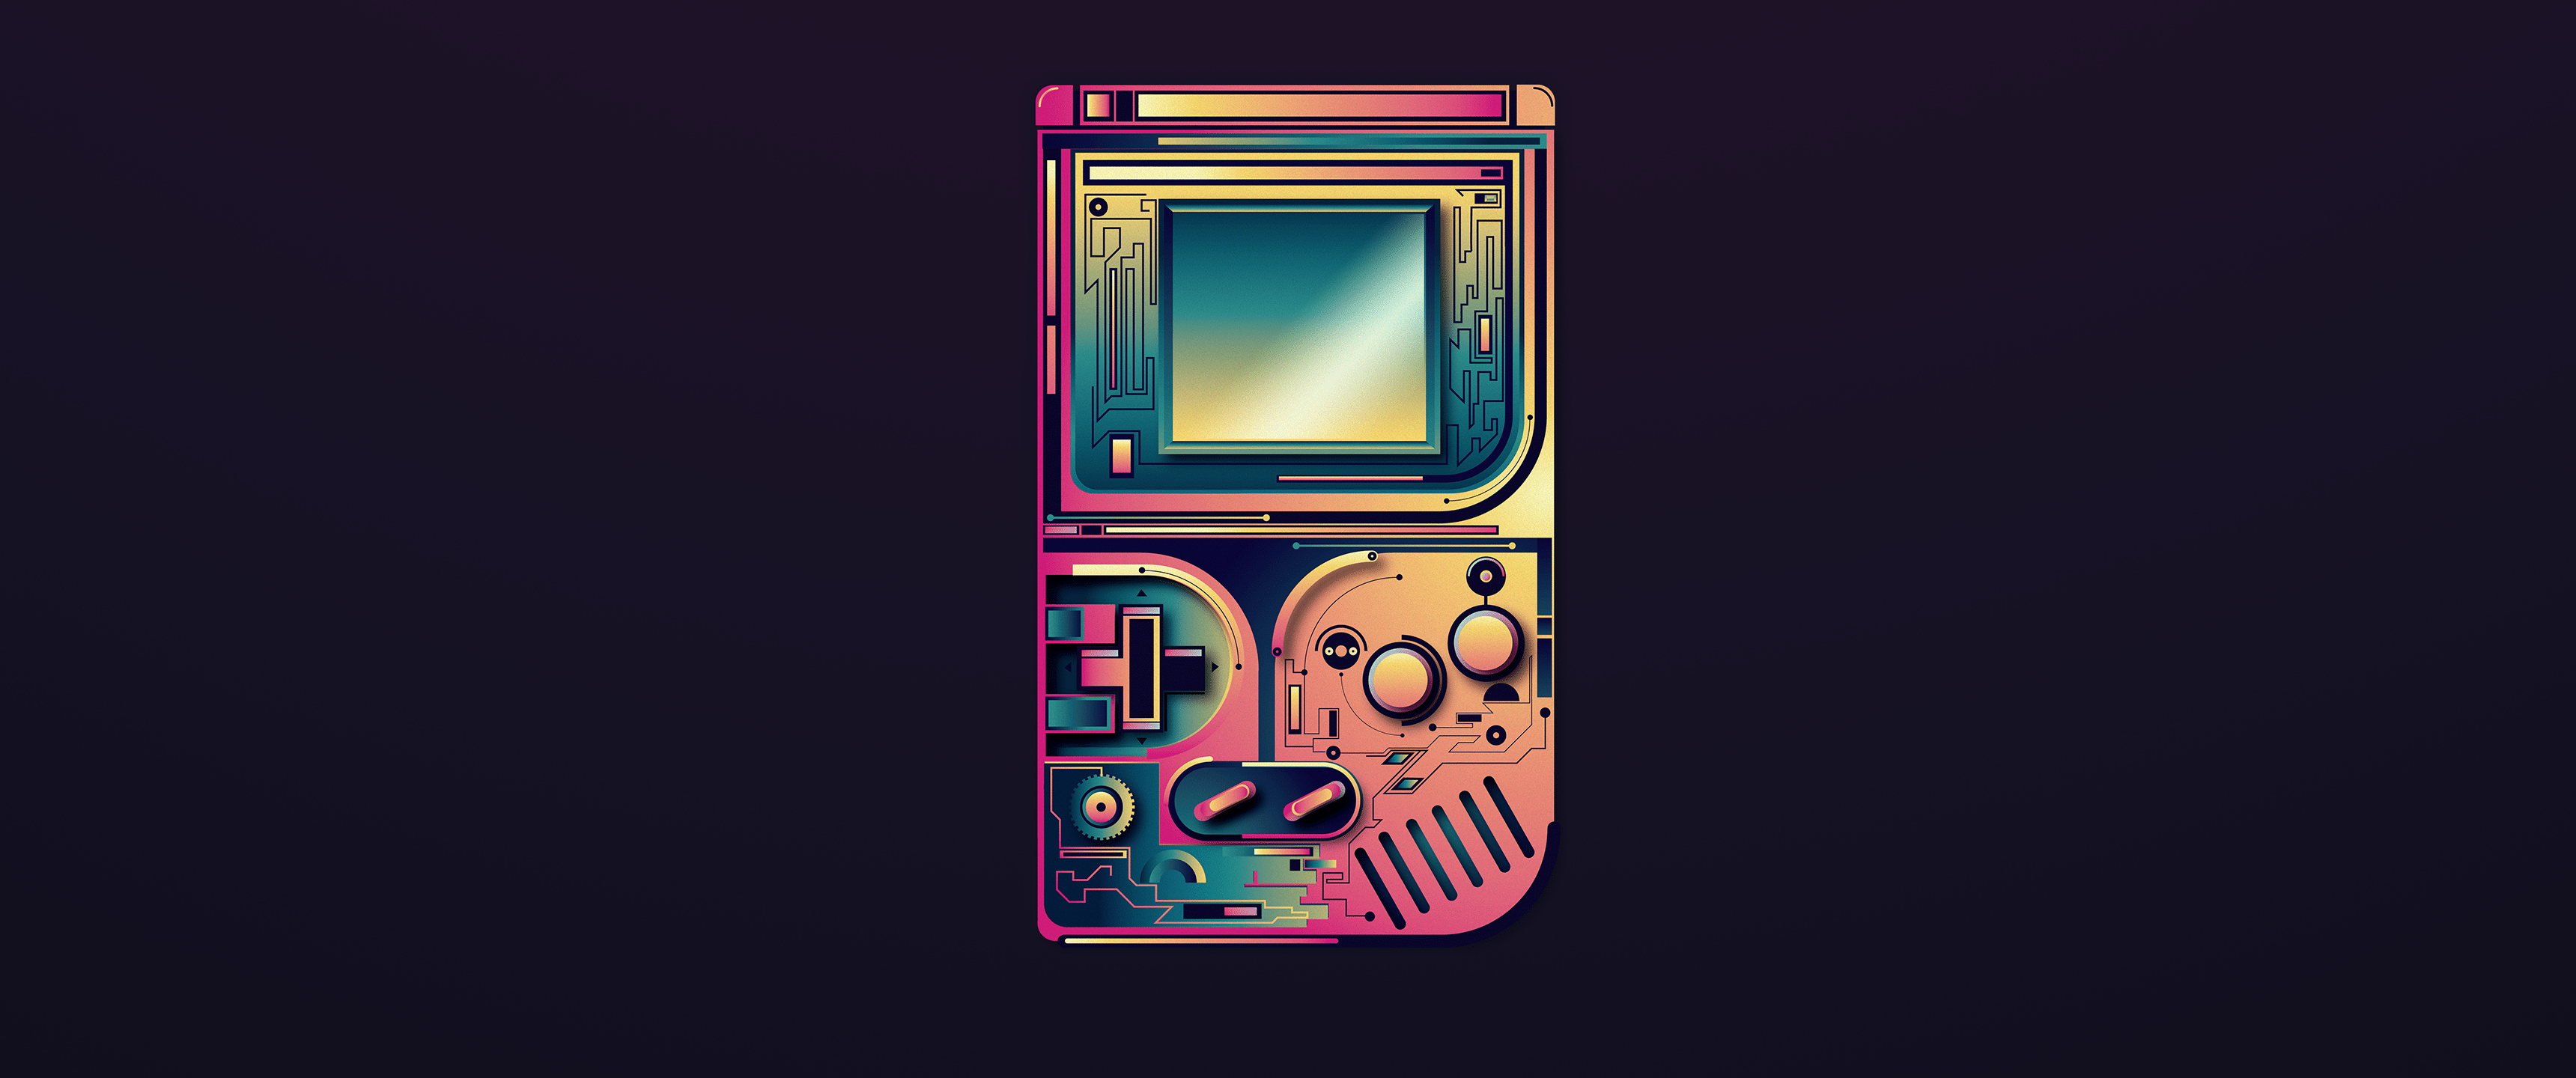 A Gameboy is shown in a gradient of blue, pink, and yellow. - 3440x1440, Game Boy, Nintendo